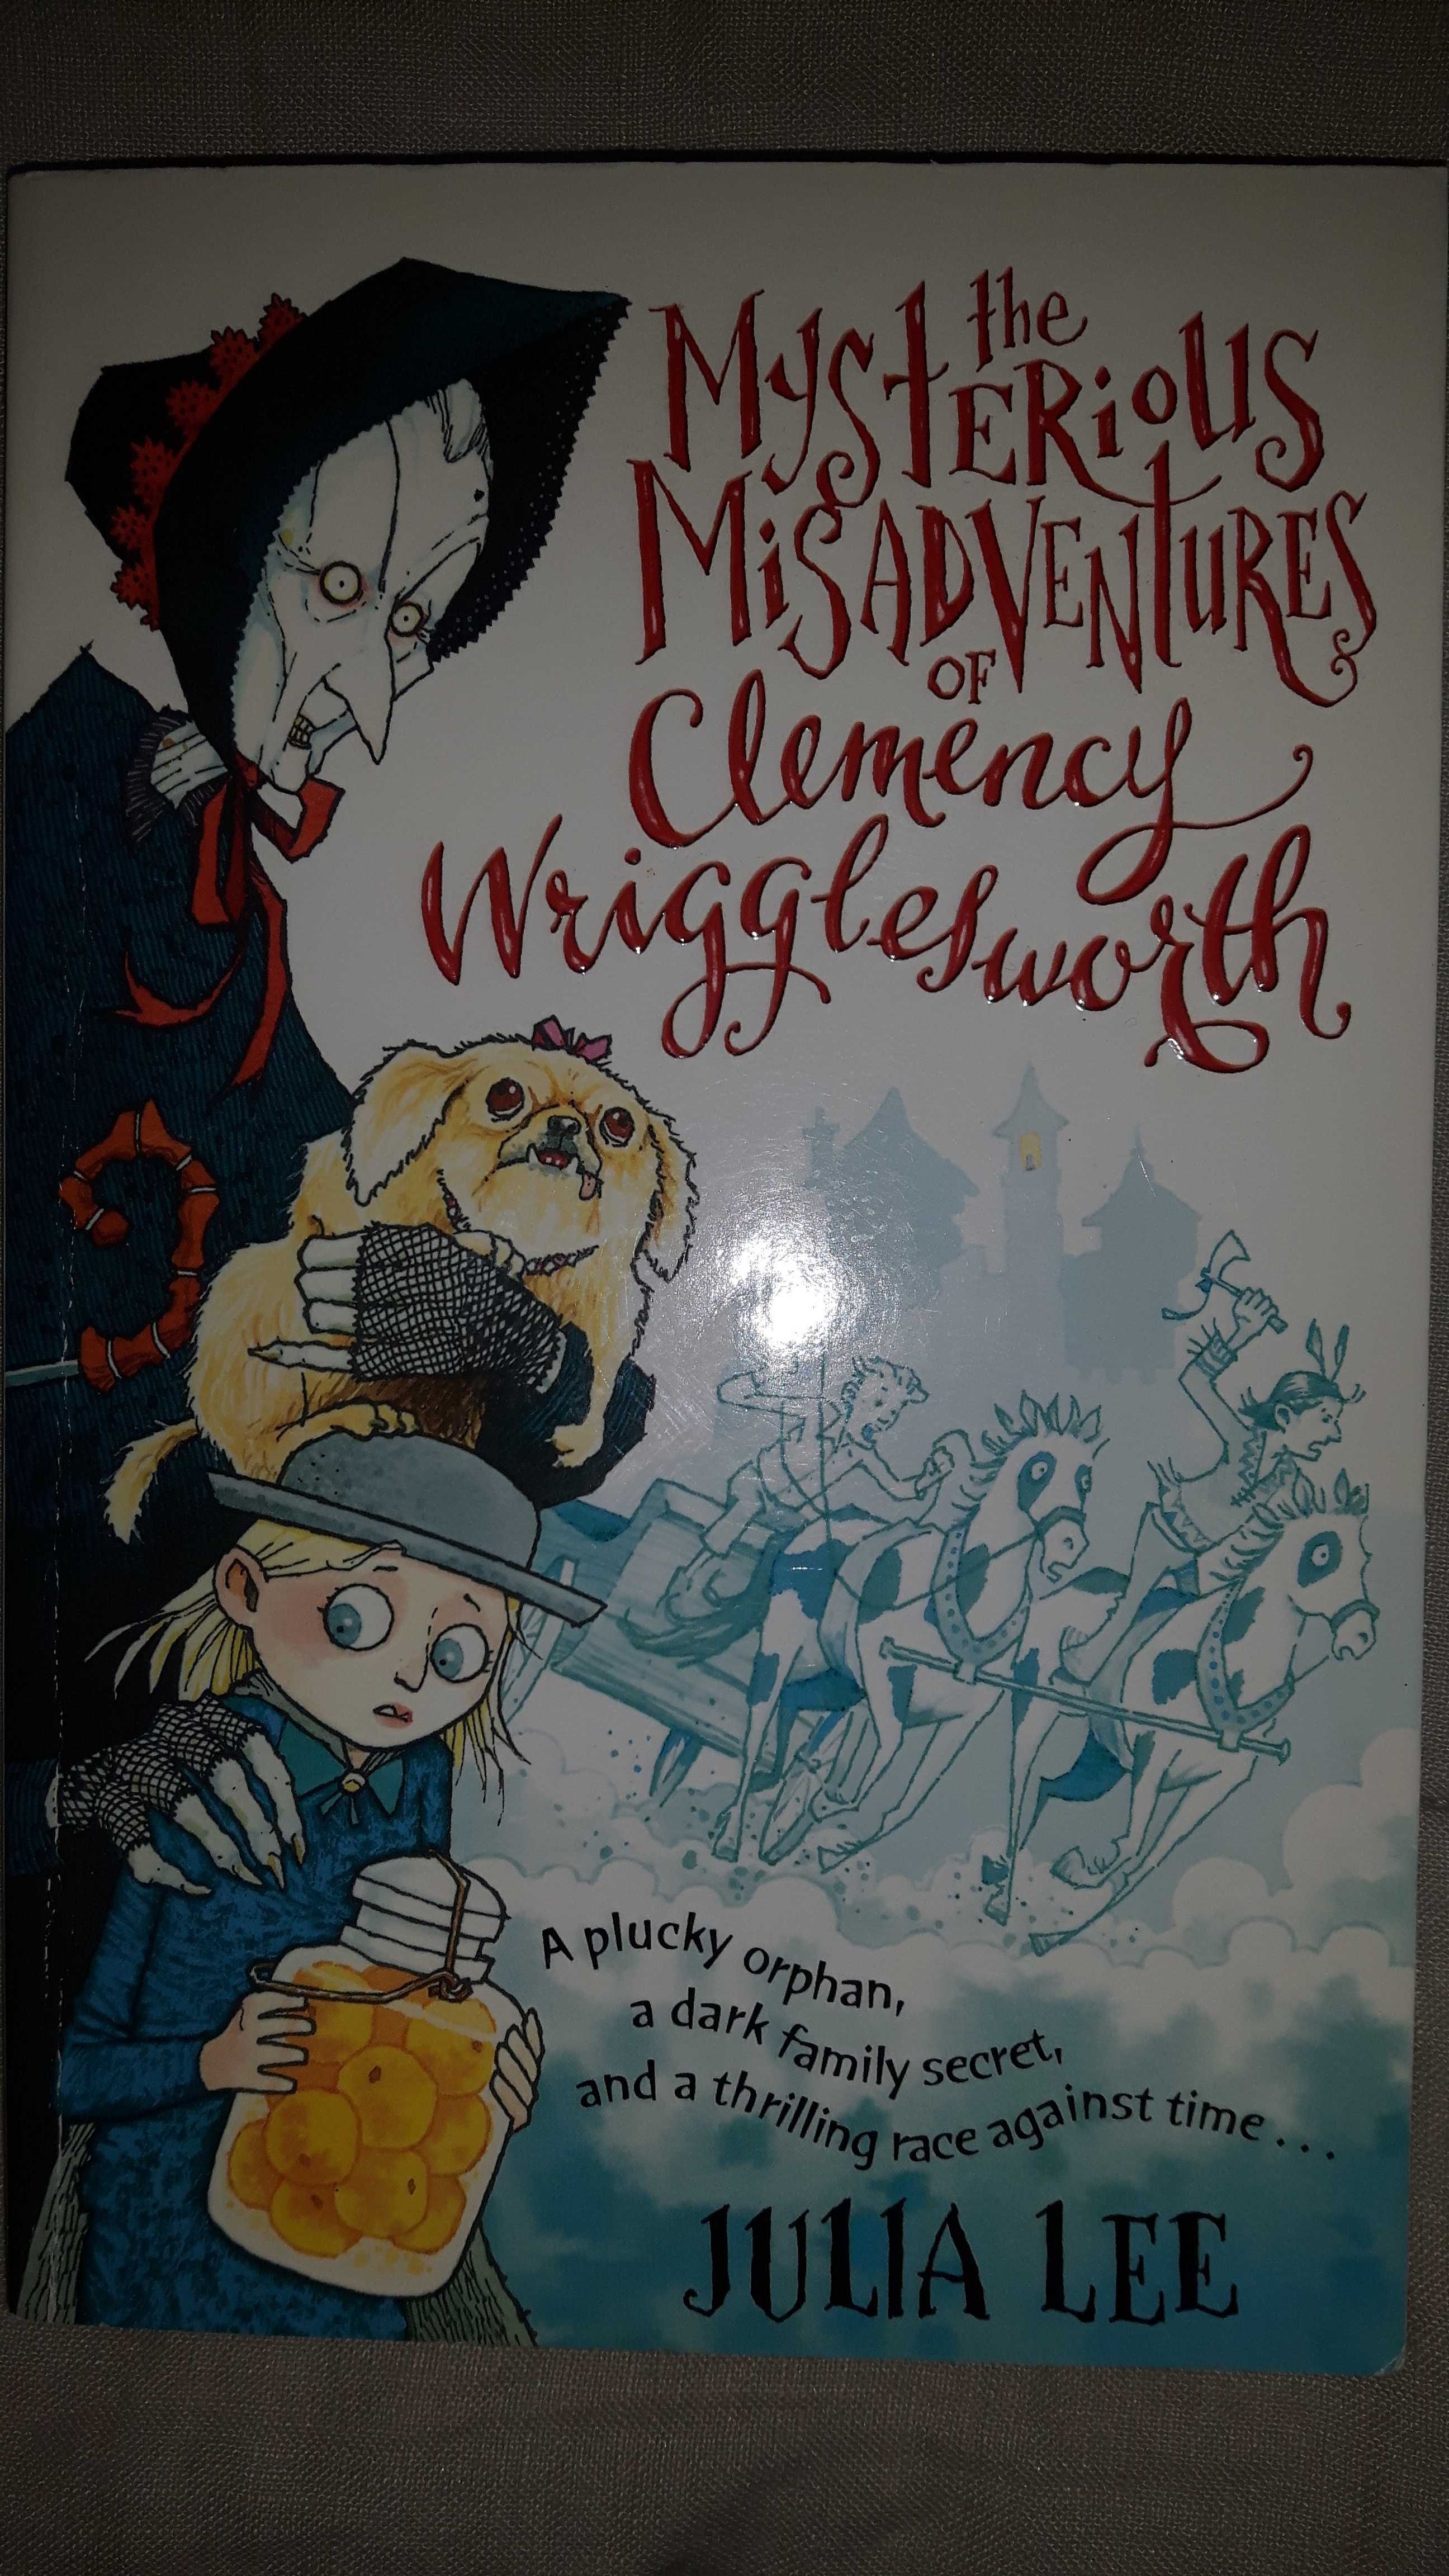 Julia Lee - The Mysterious Misadventures of Clemency Wrigglesworth